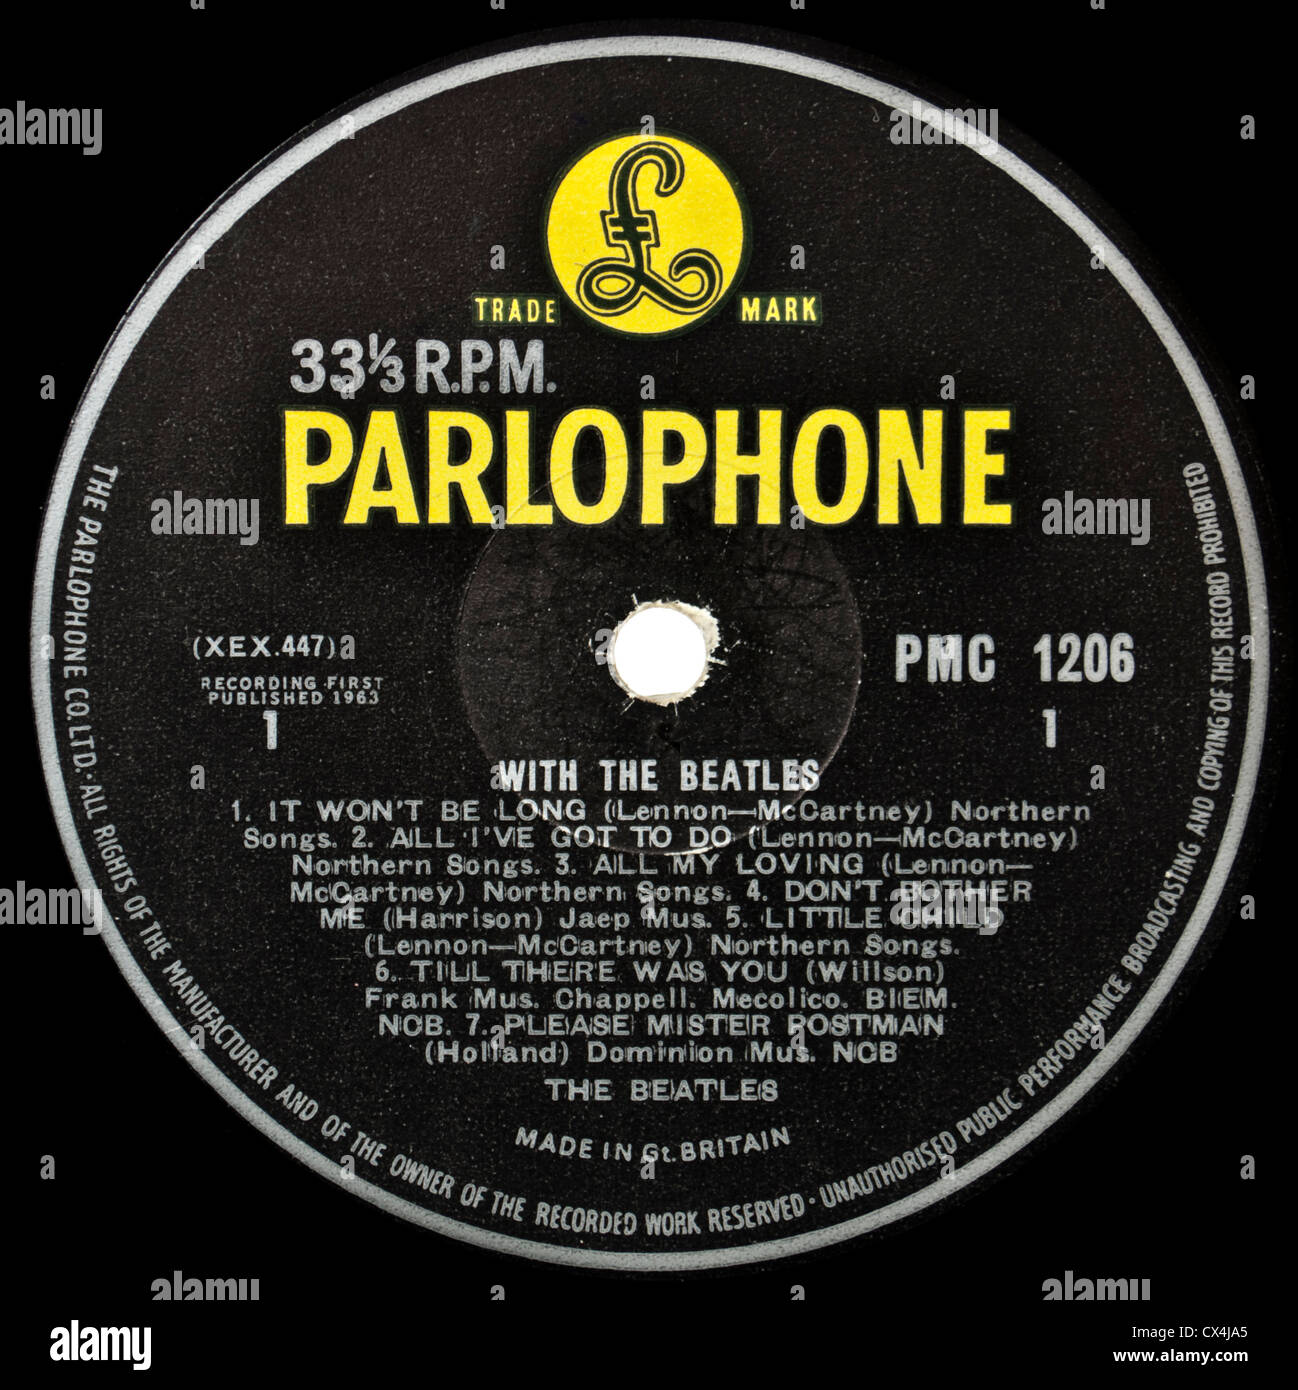 'With The Beatles' LP by The Beatles - Original 1963 mono version - First British pressing, Parlophone PMC 1206. Stock Photo